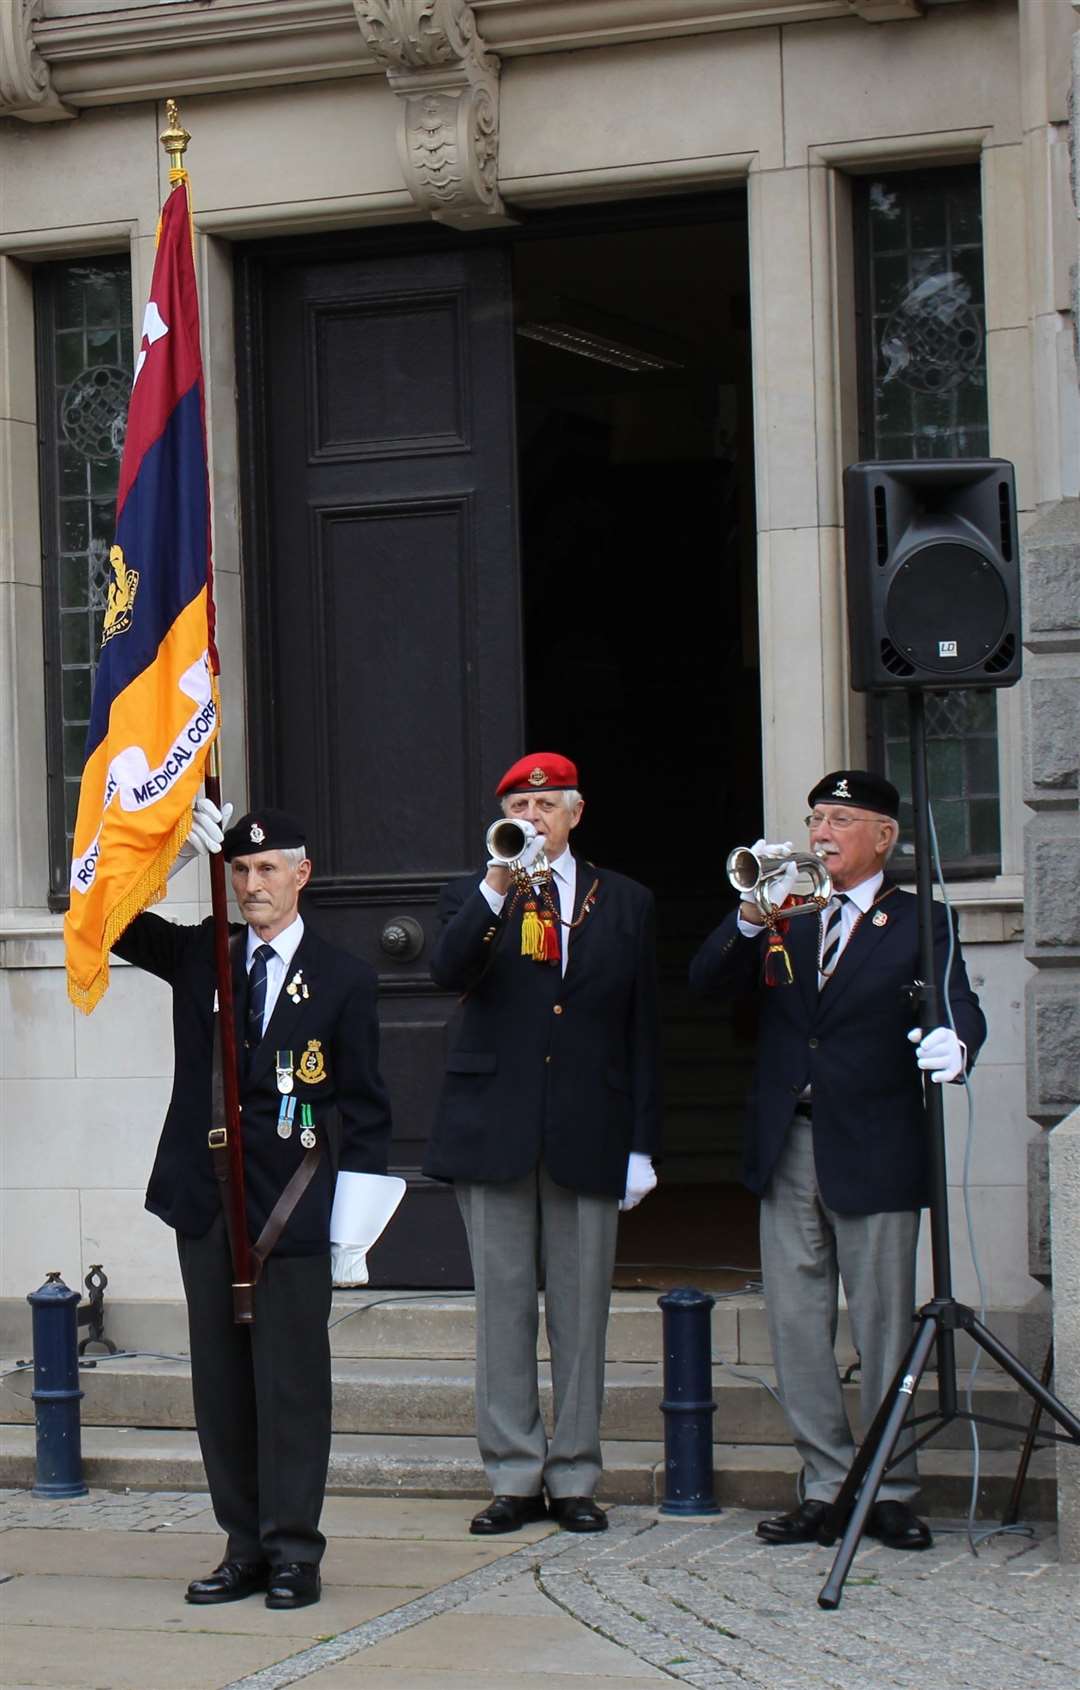 Buglers John Leigh and Barry Knight play reveille